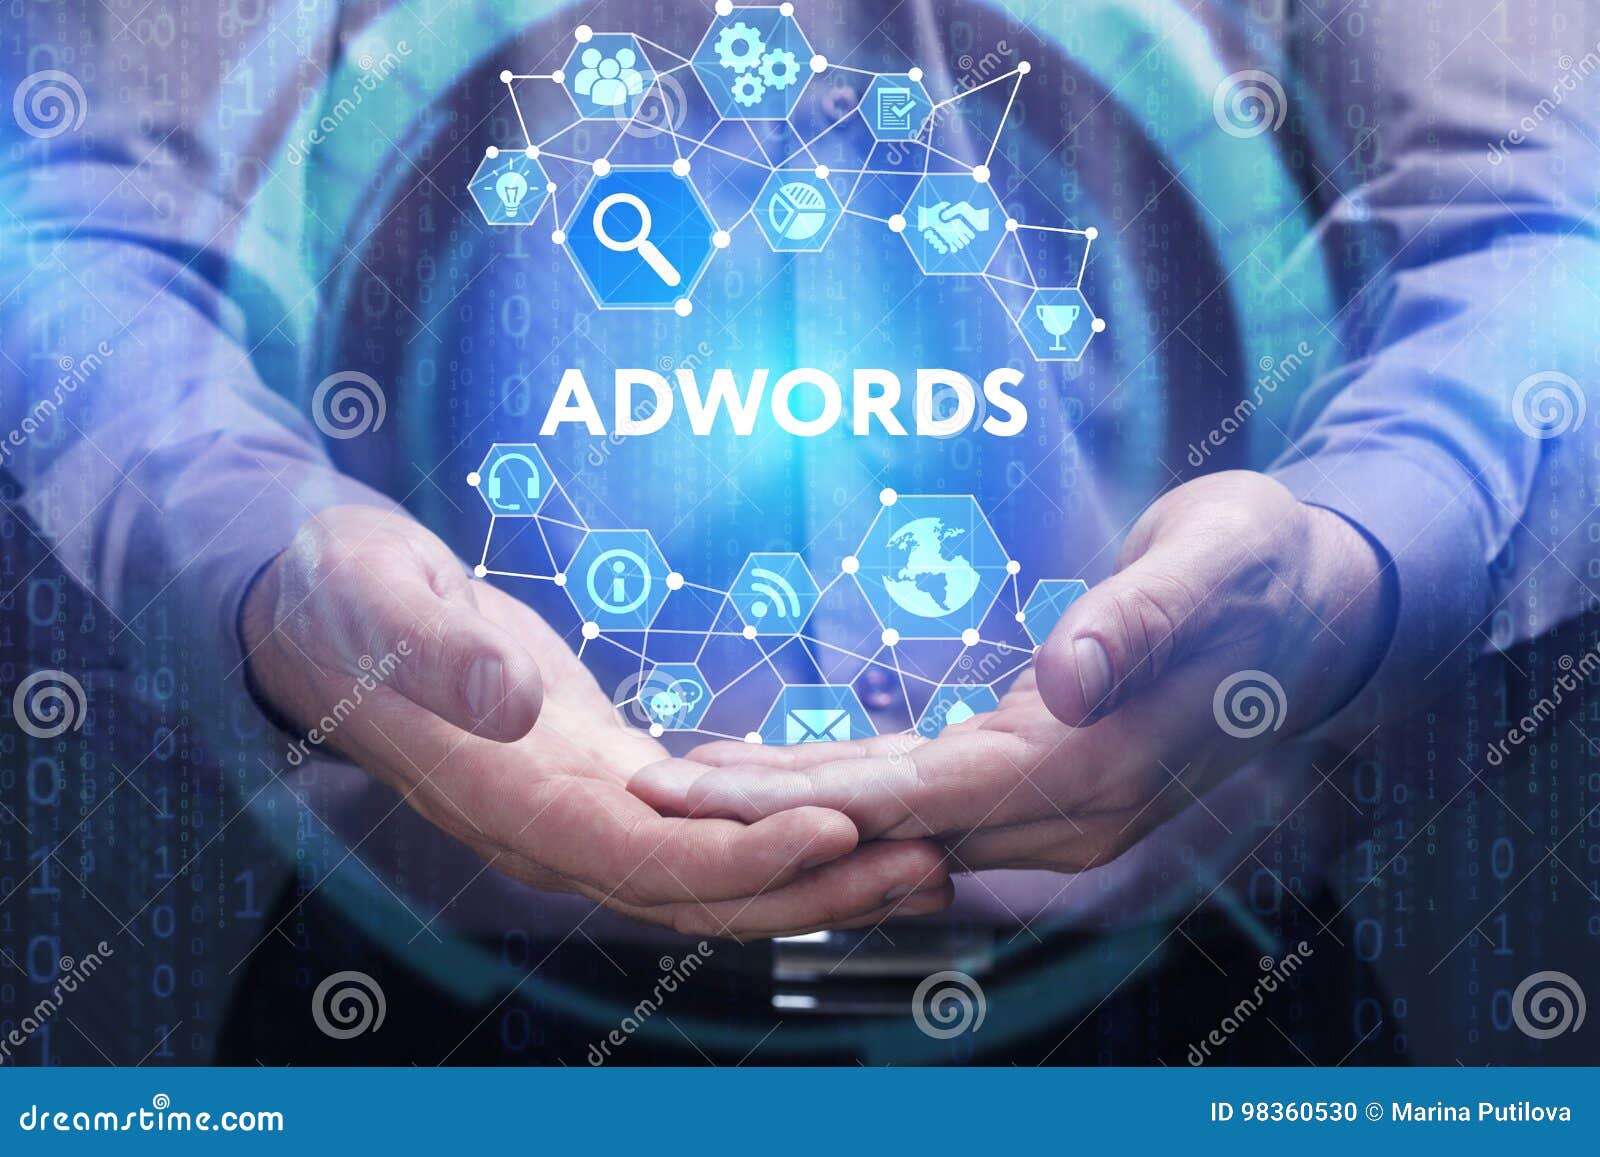 business, technology, internet and network concept. young businessman shows the word on the virtual display of the future: adwords